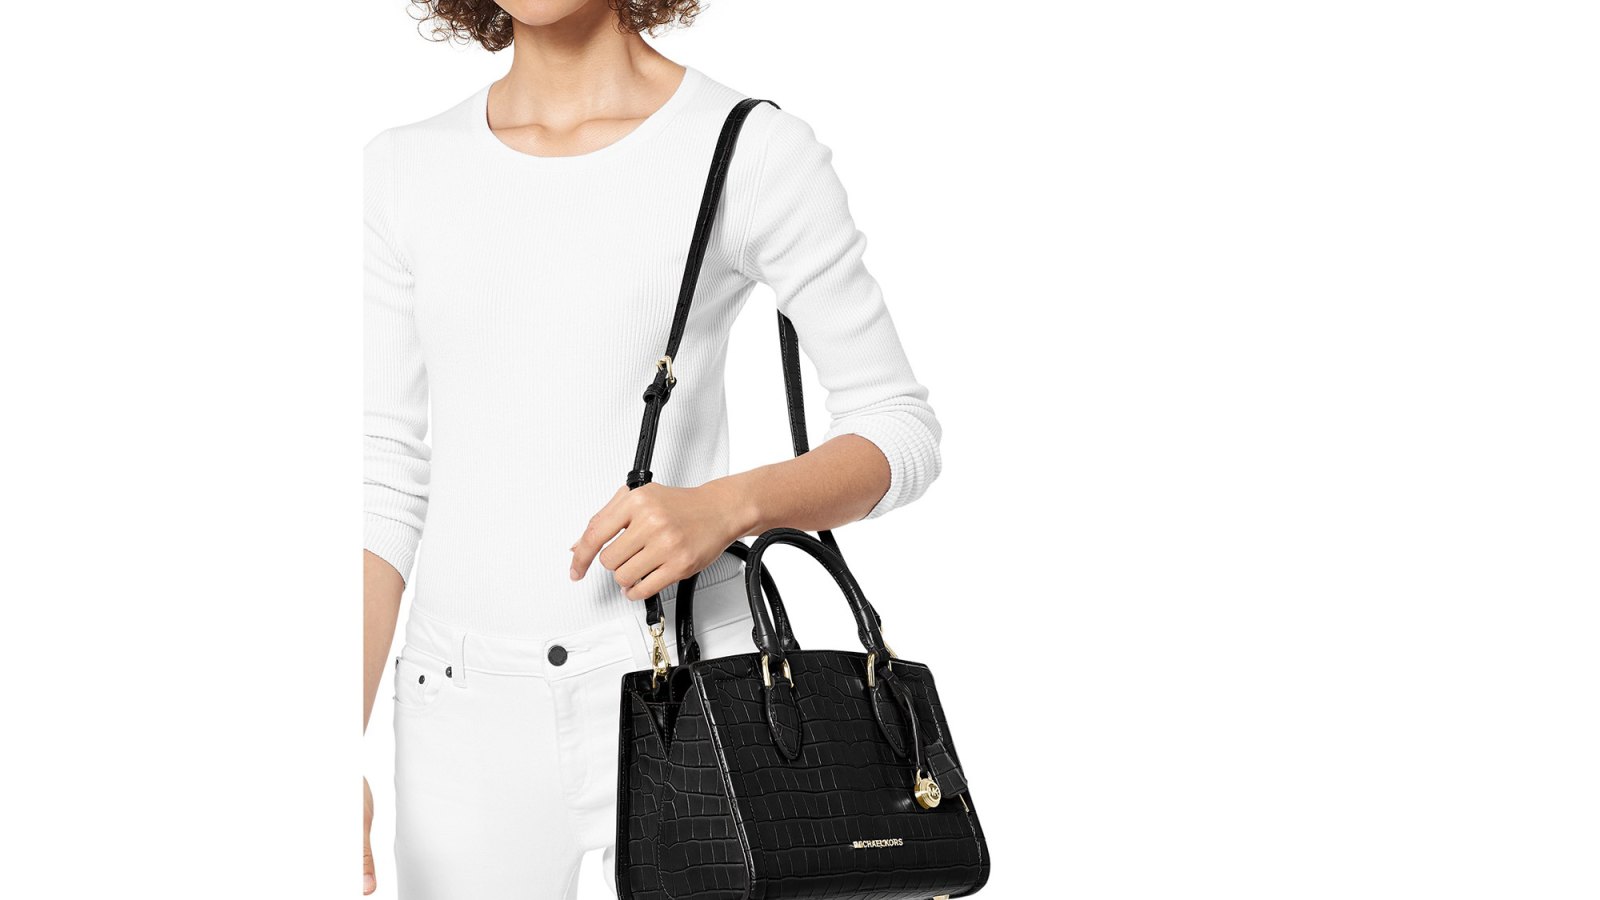 This Michael Kors Bag Is On at Macy's — Shop